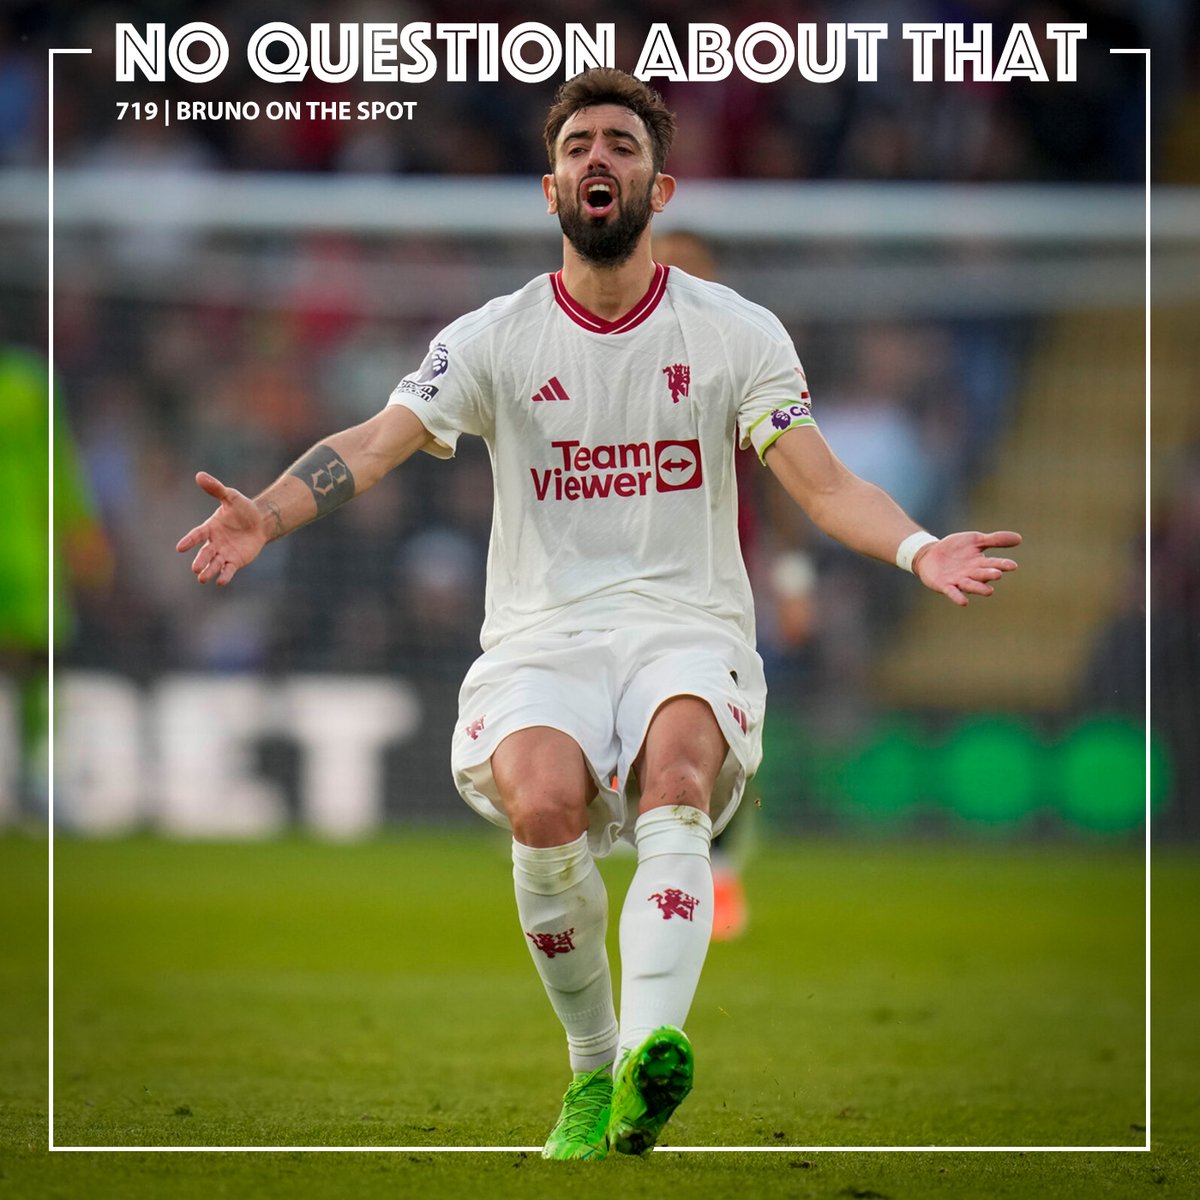 New pod! United draw at Bournemouth and slip further away from a very unlikely Champions League place. And with Newcastle beating Spurs, United are now seventh and may have to play next season in the ... Europa Conference League. Ed & Dan commiserate. podfollow.com/no-question-ab…